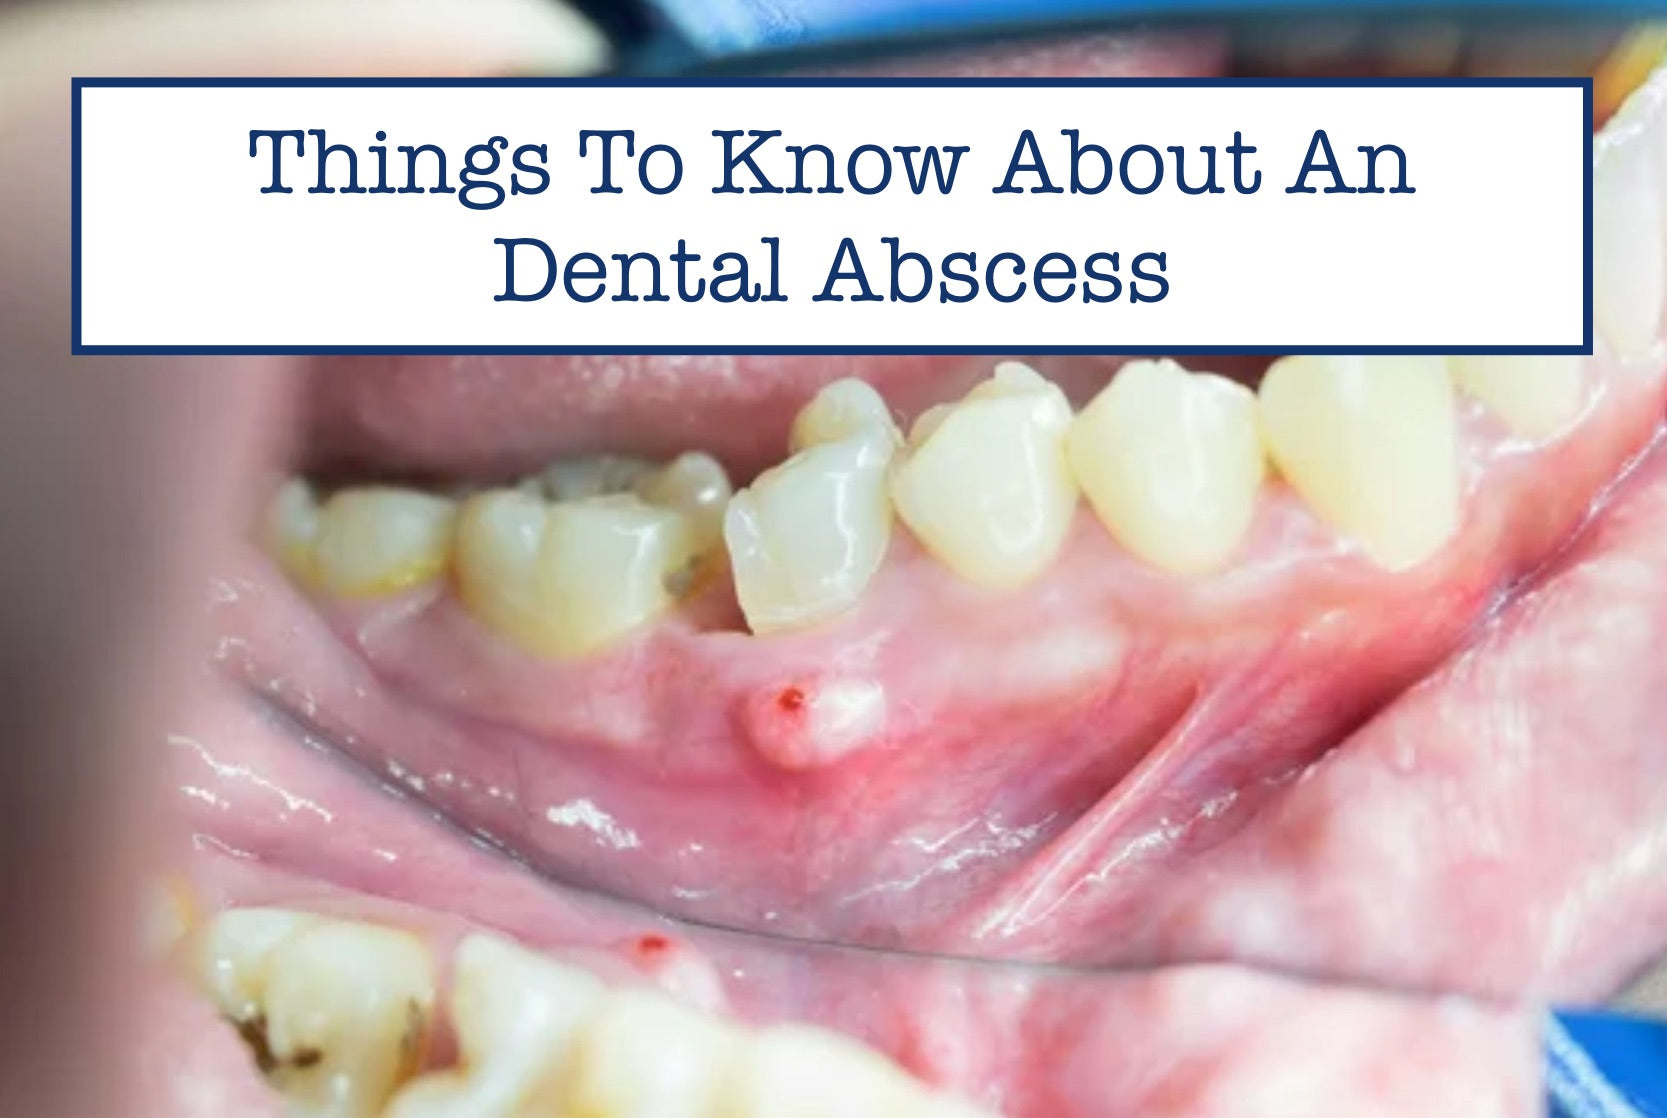 Things To Know About An Dental Abscess